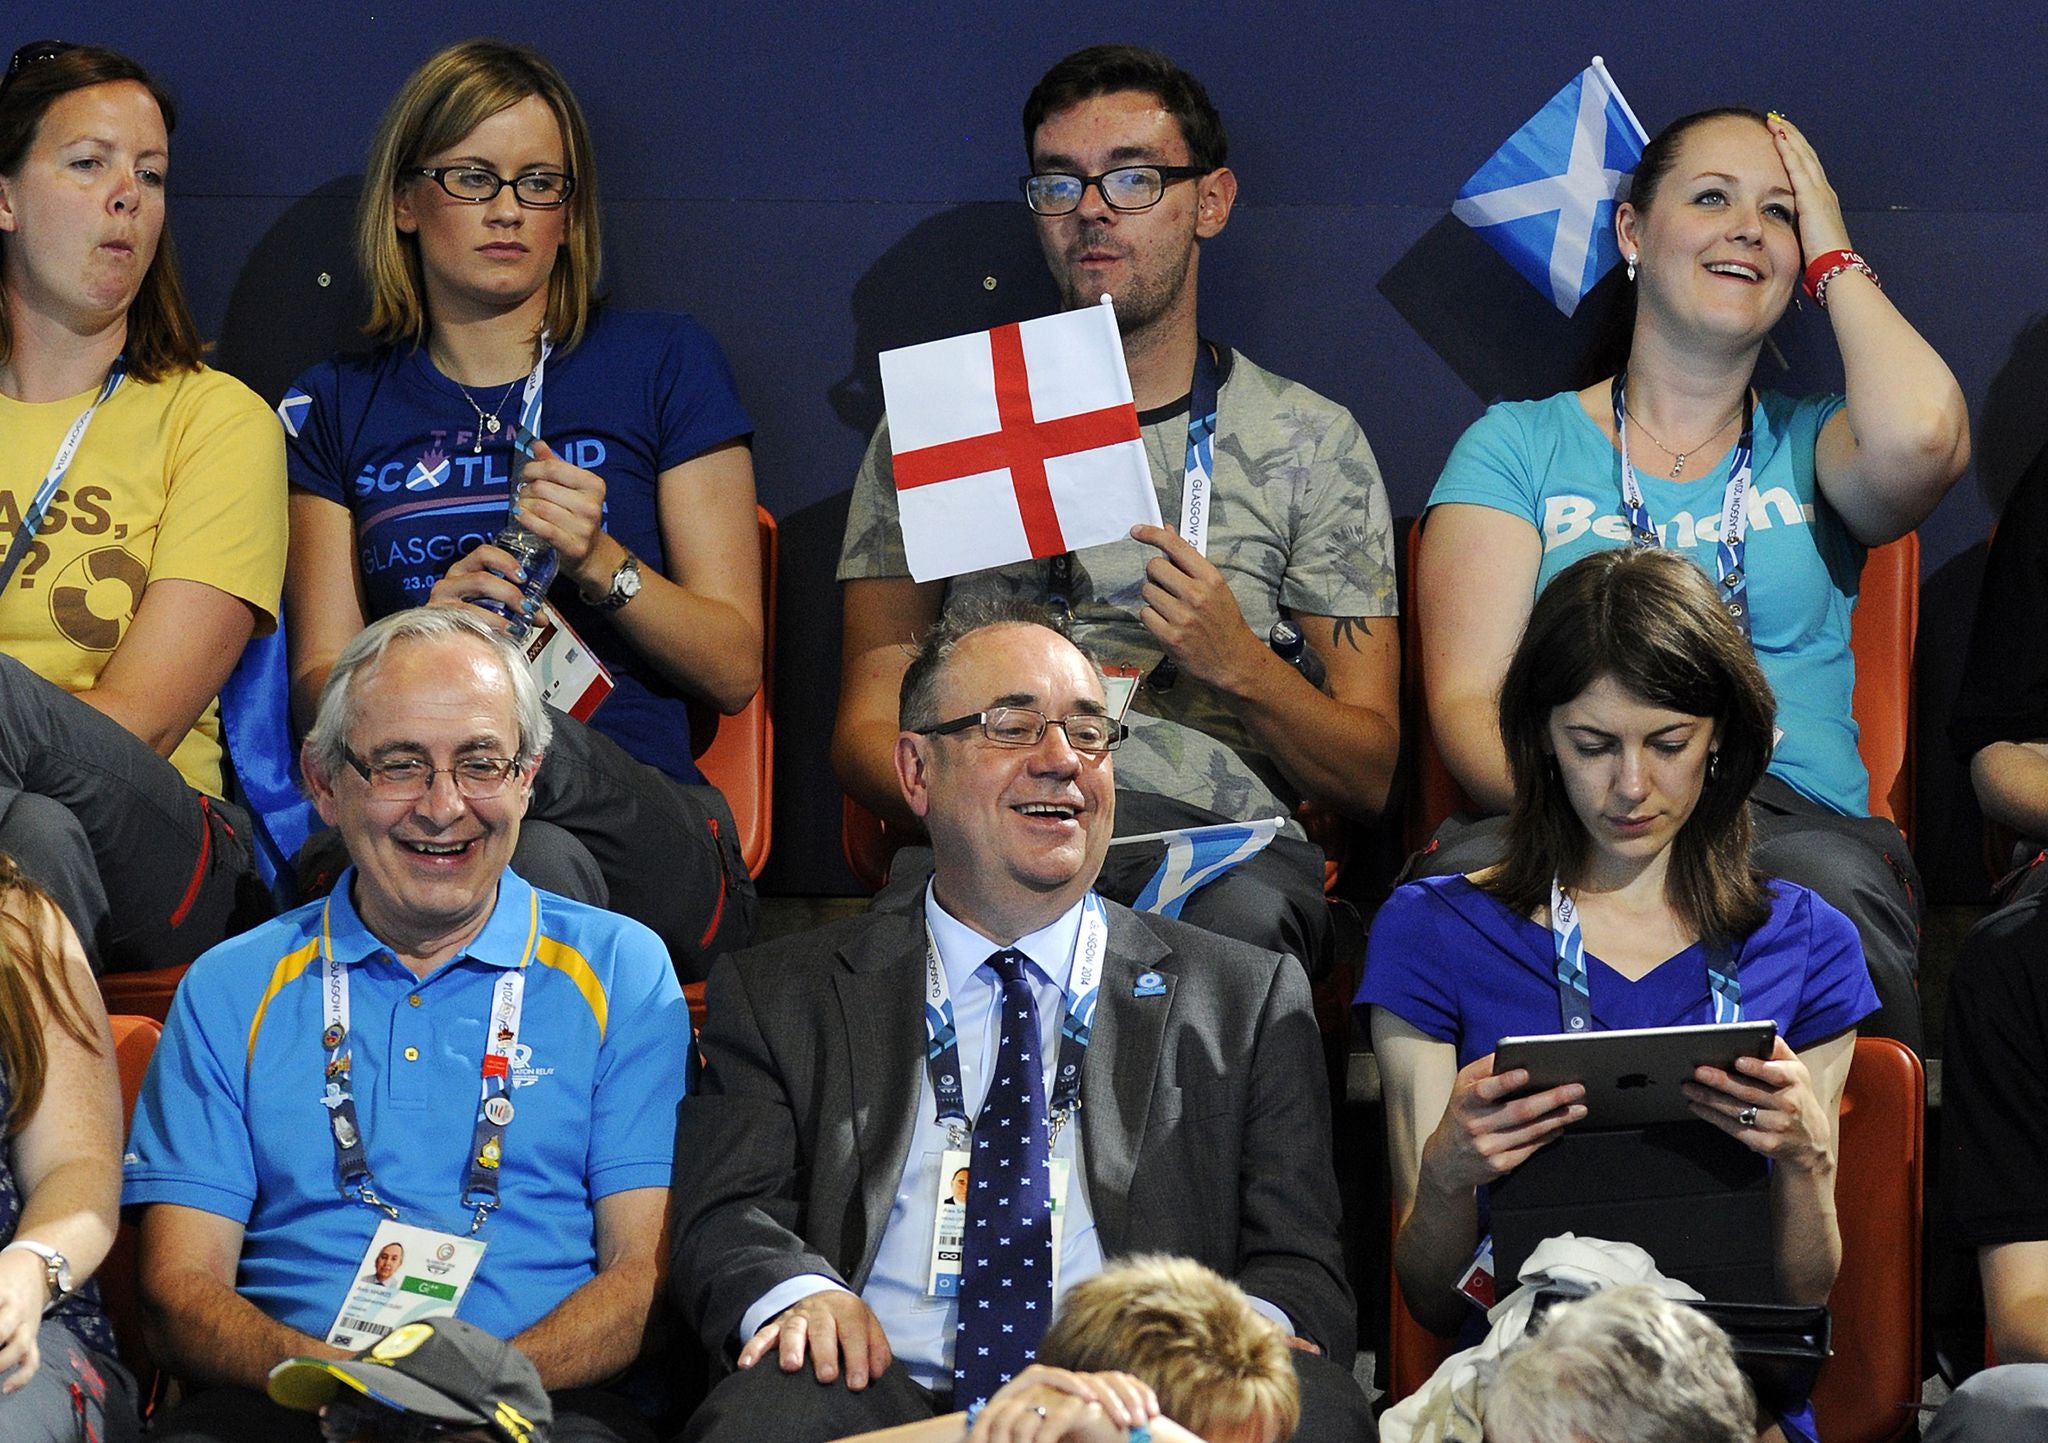 A diving spectator waves the St George flag above Scotland's First Minister Alex Salmond